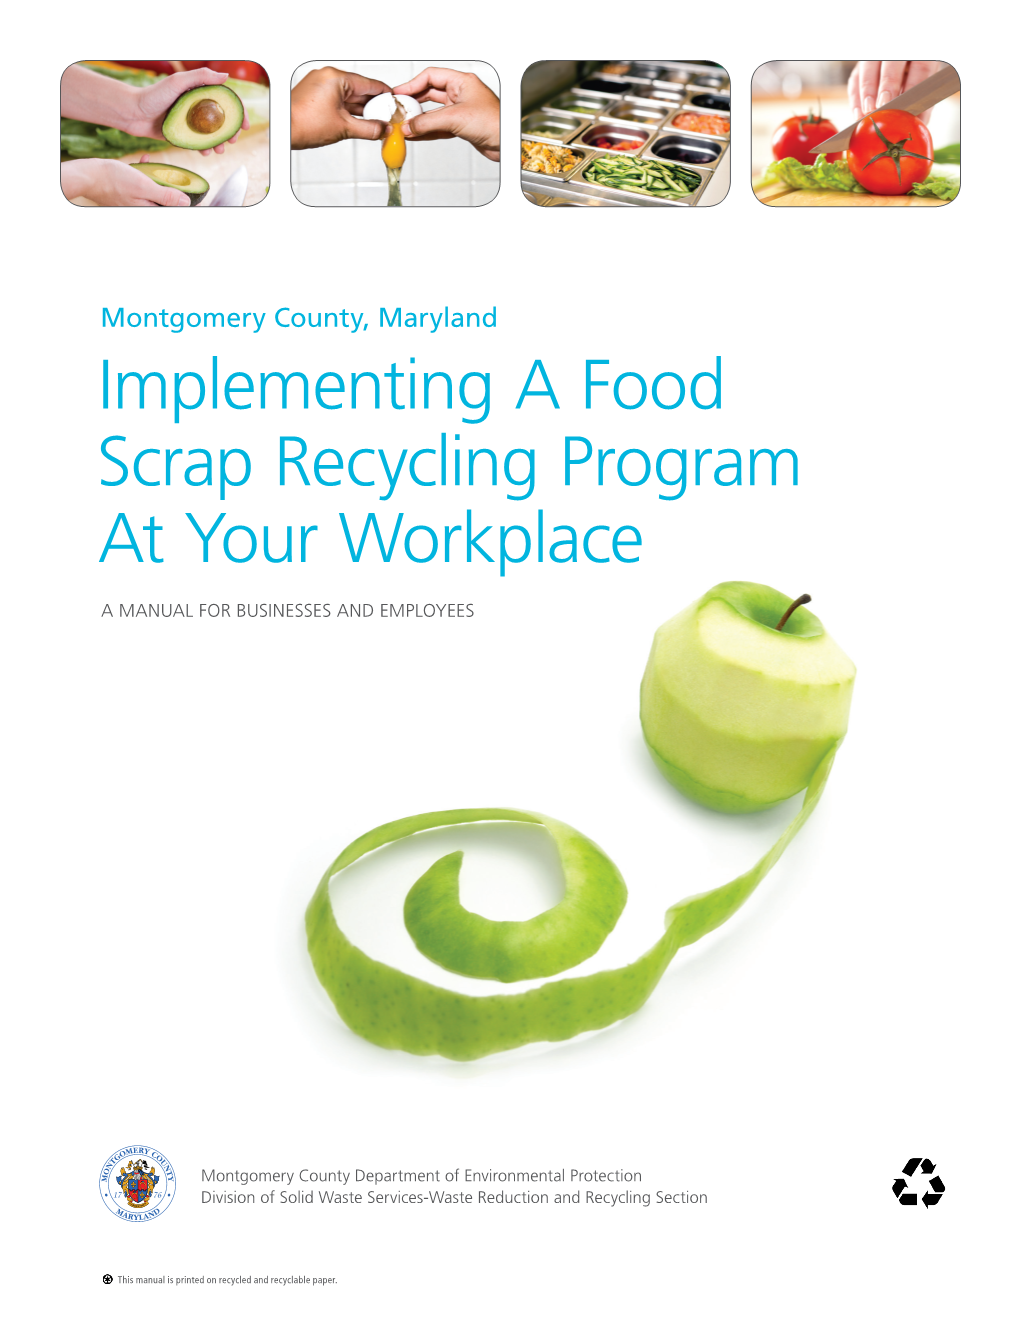 Implementing a Food Scrap Recycling Program at Your Workplace